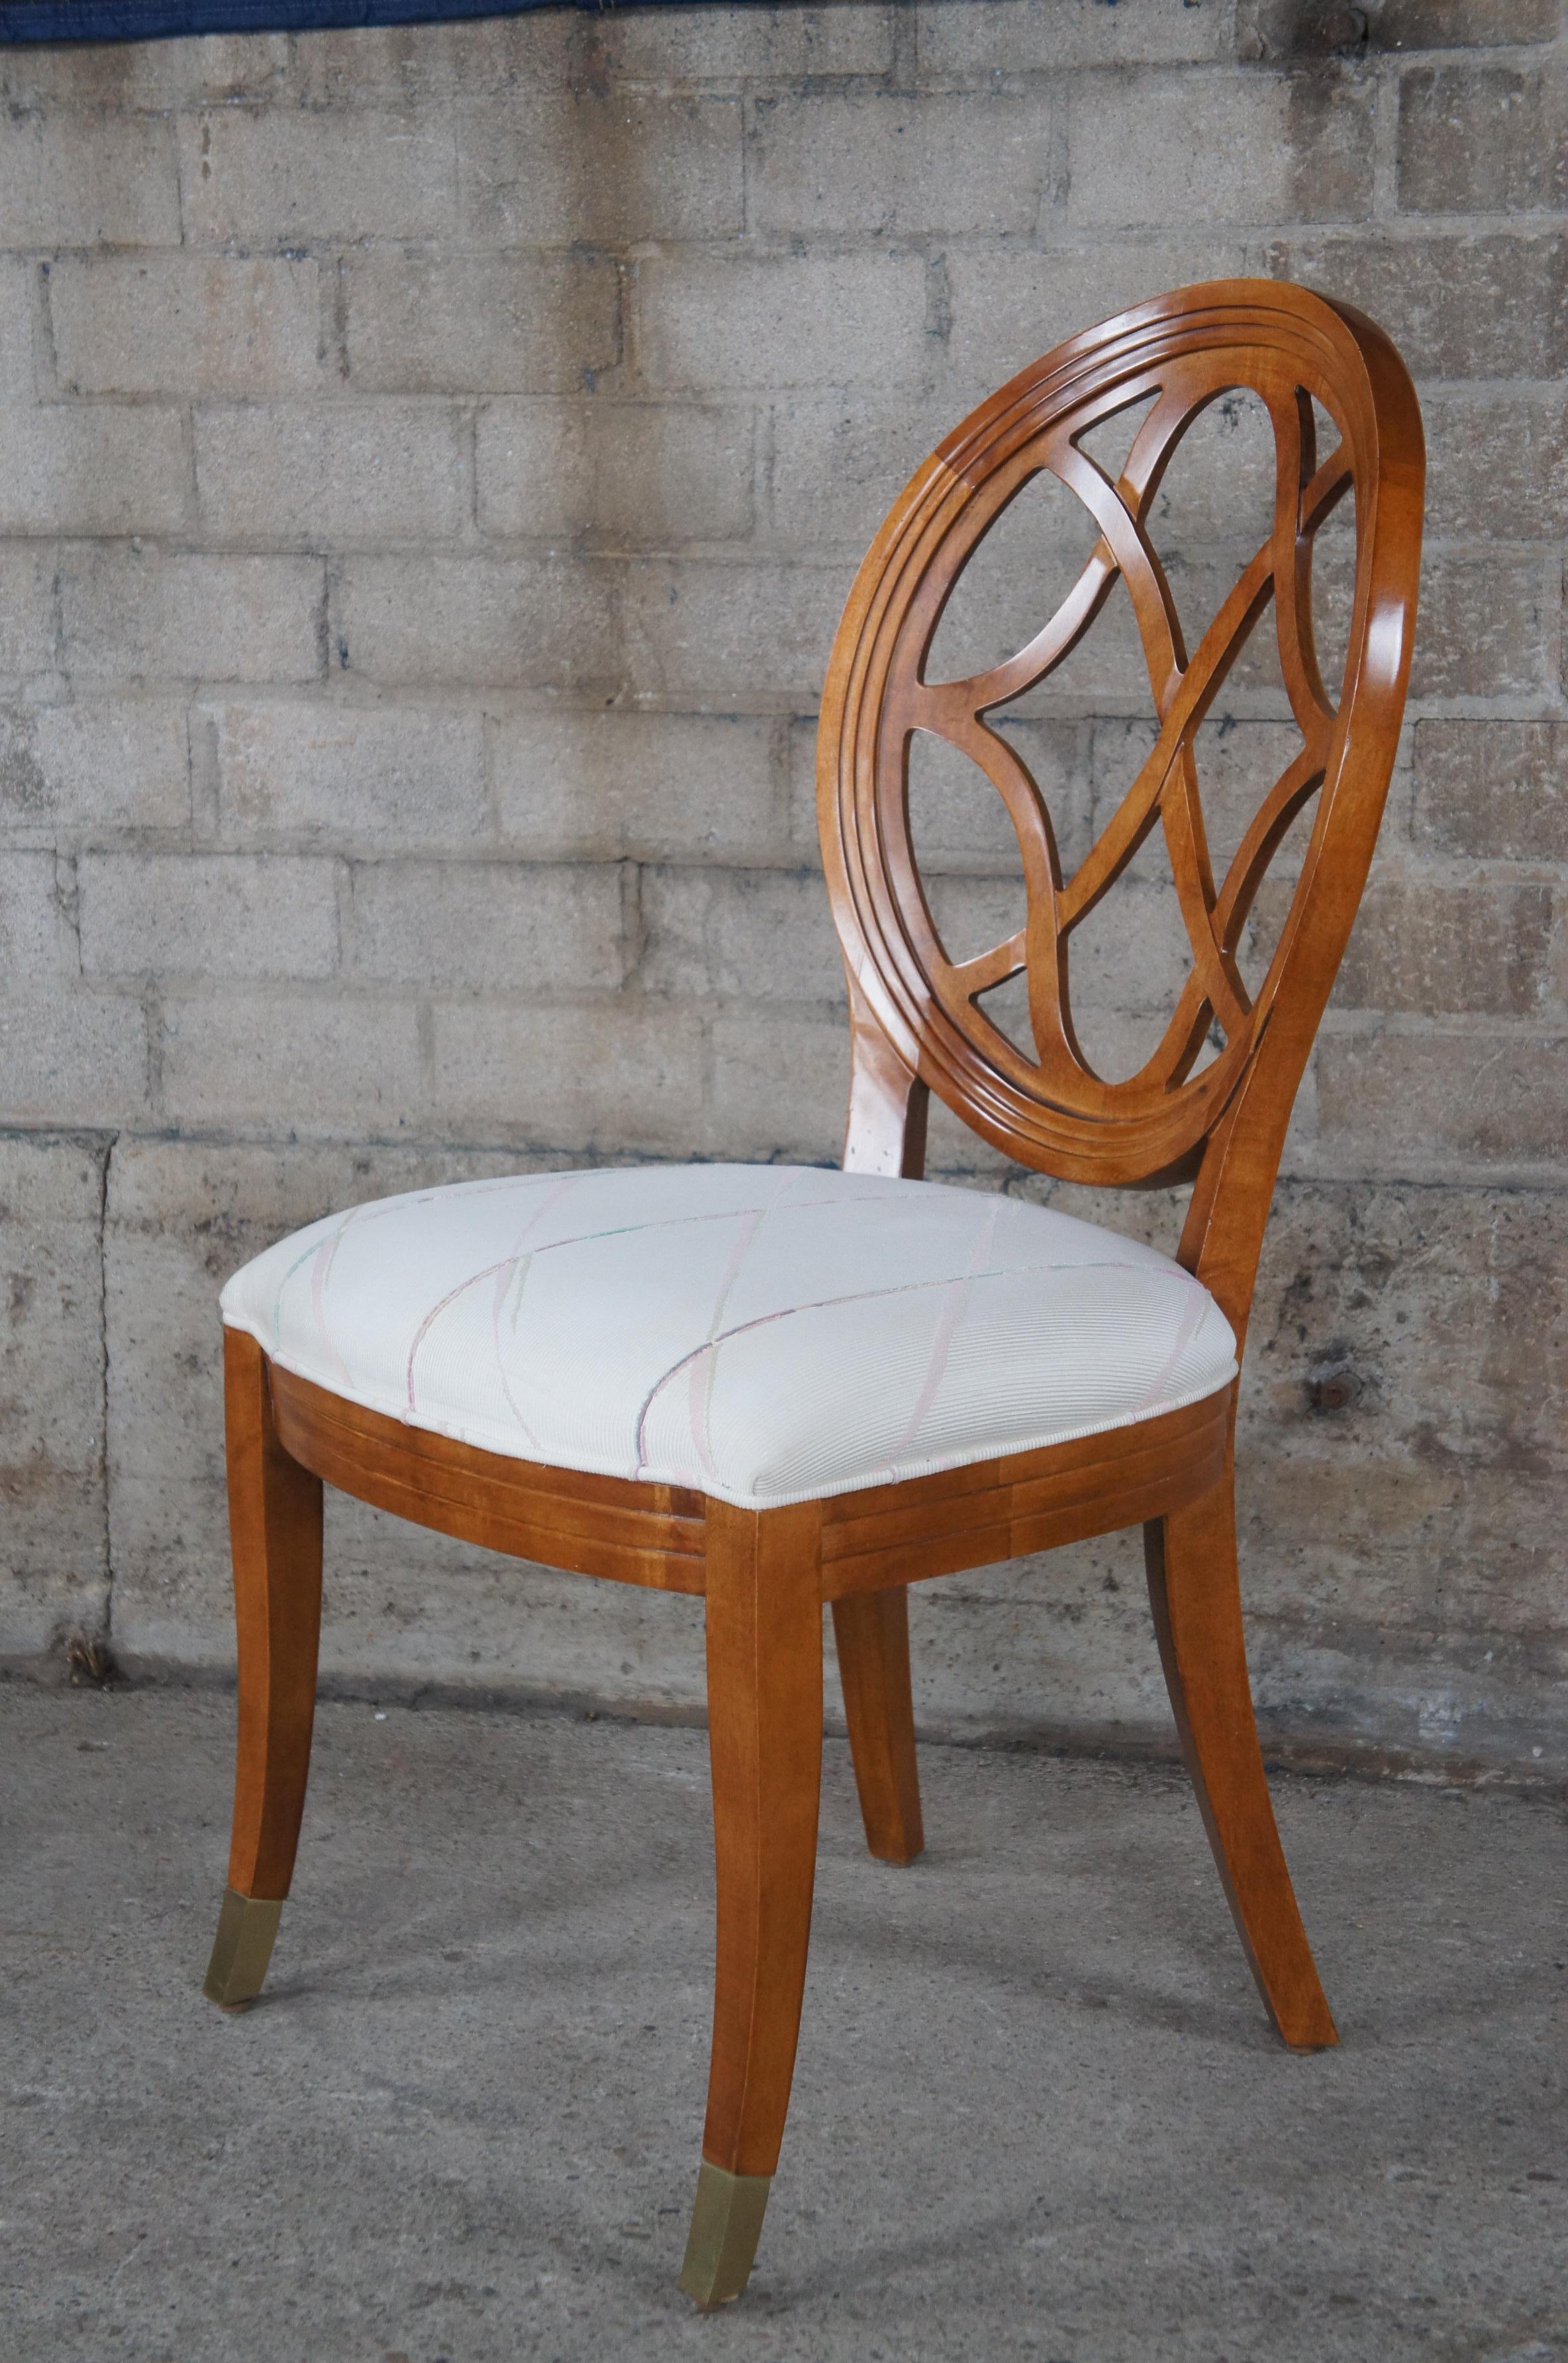 Late 20th Century 8 Century Furniture Maple Pierced Back Dining Side Chairs Transitional 341-511